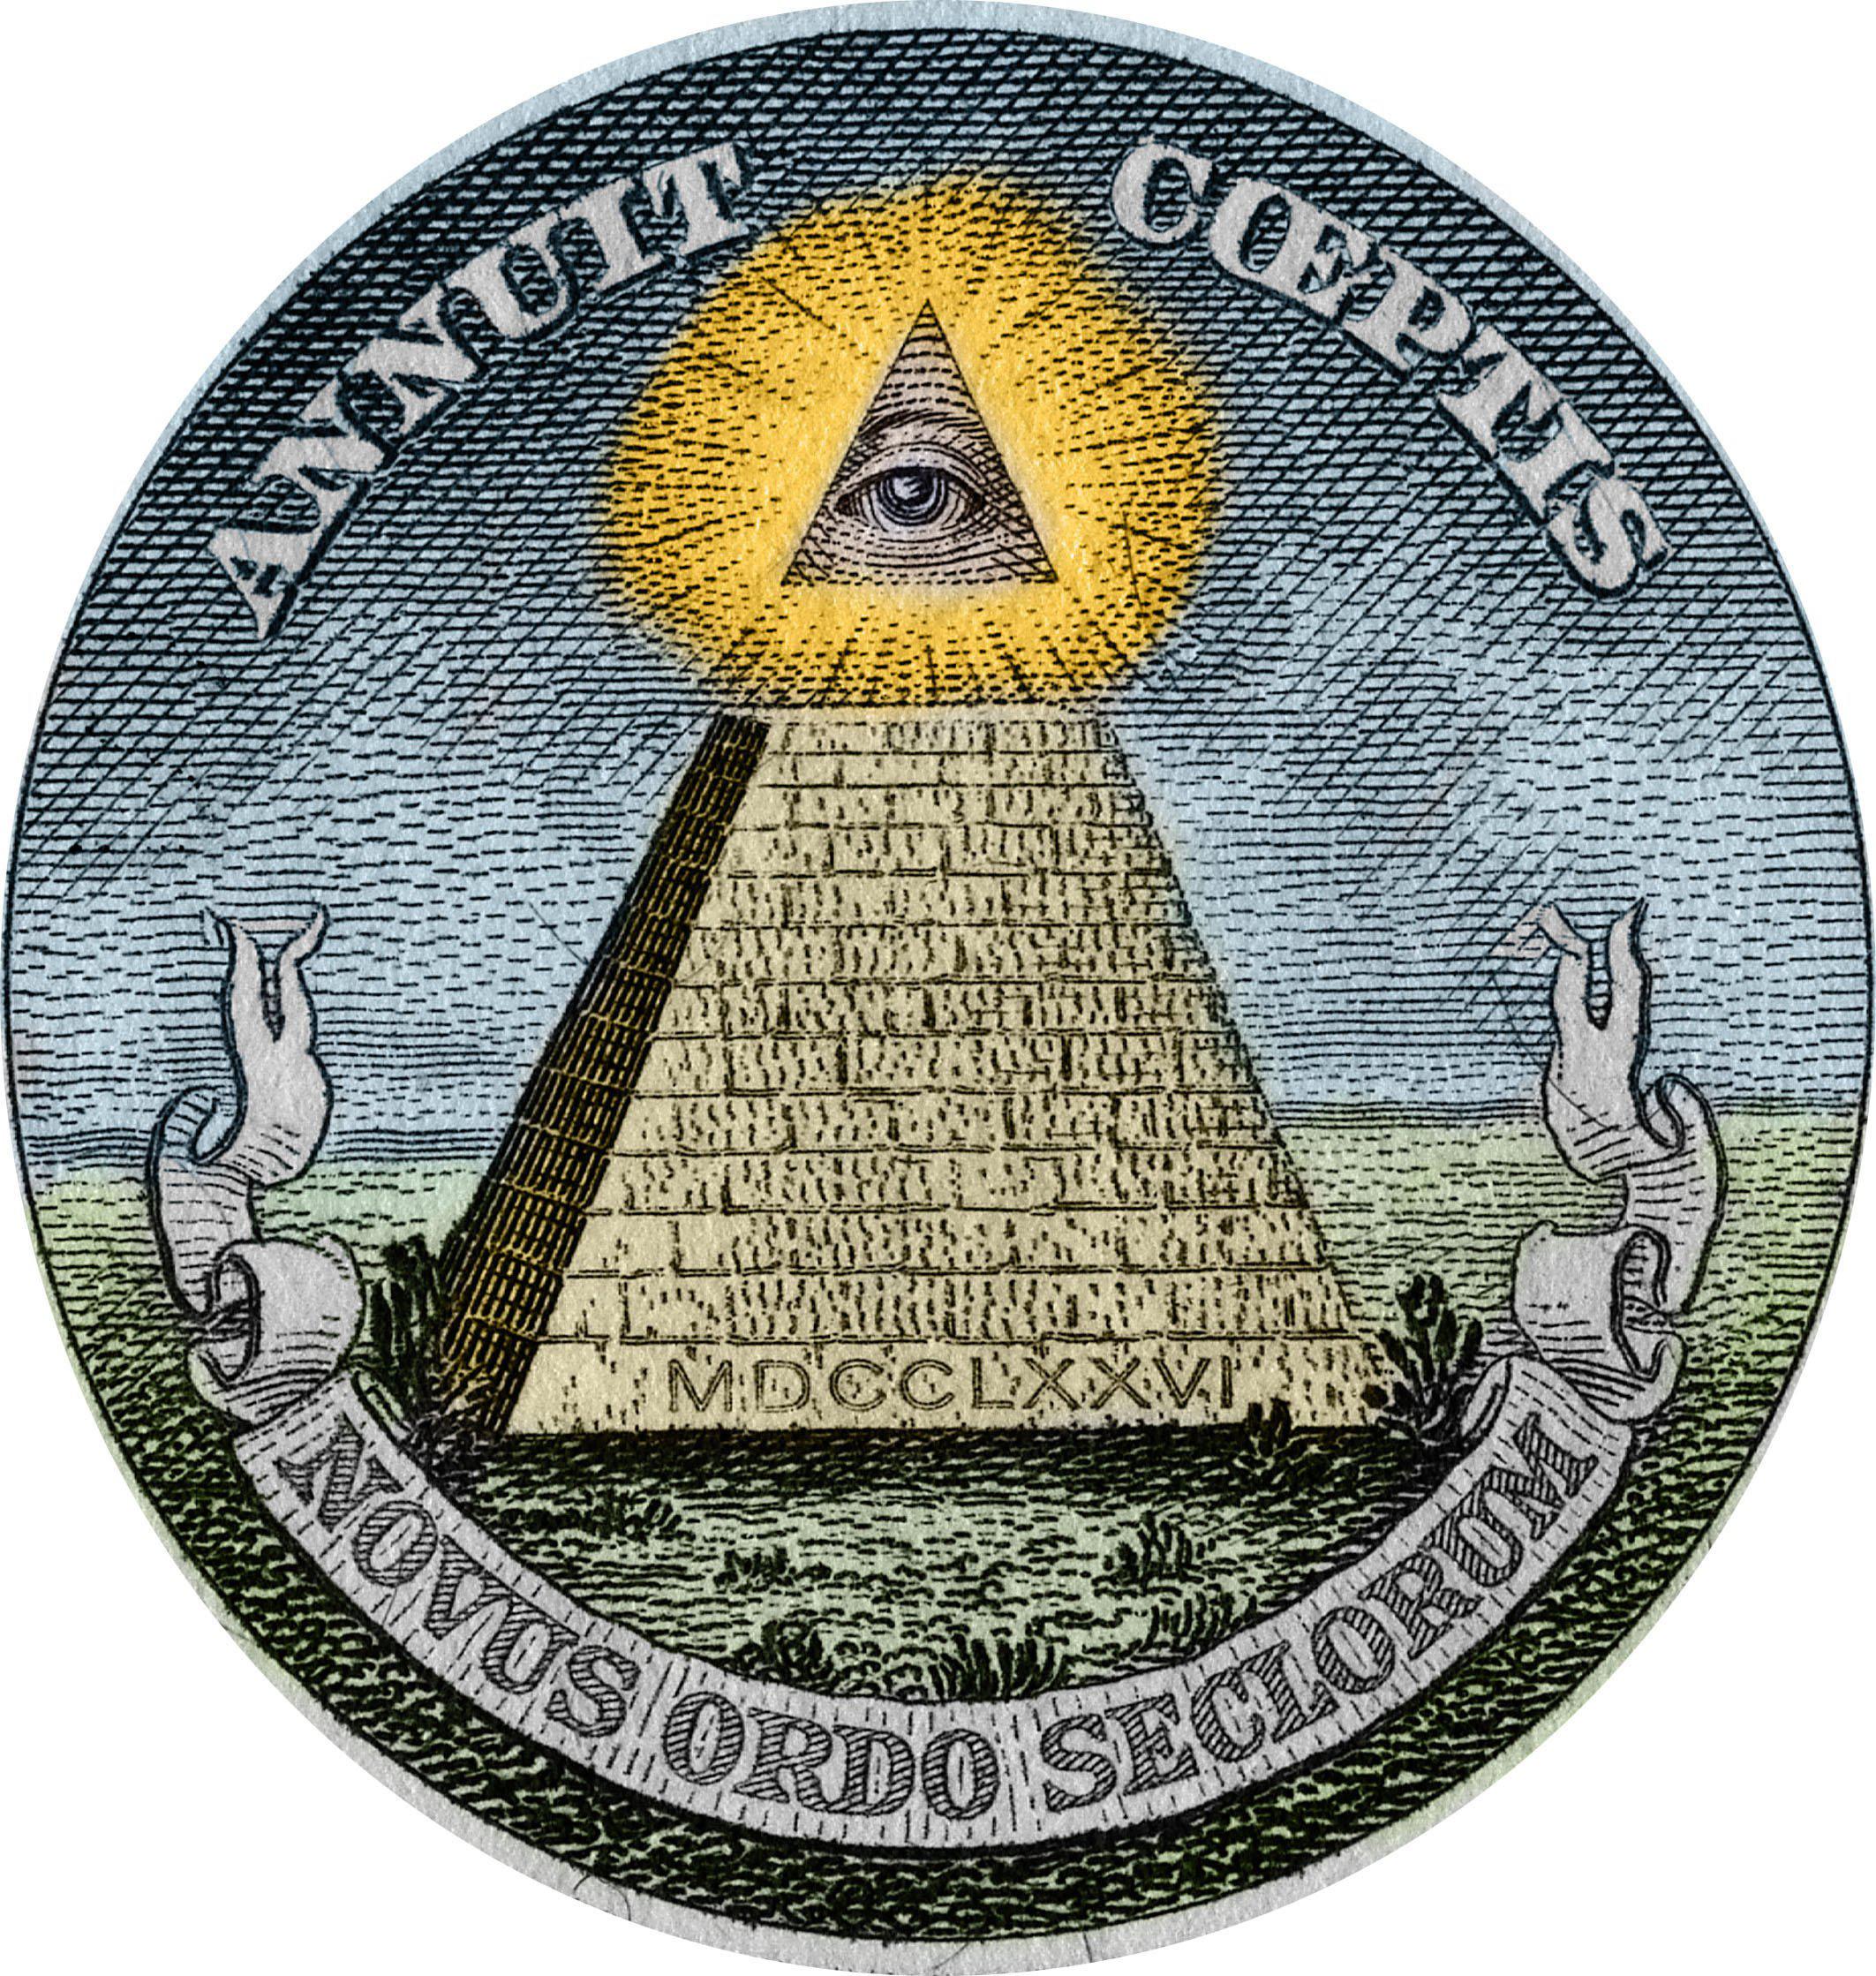  The Illuminati conspiracy theory claims the existence of a secret club that is in control of all governments and cultivates a global leadership called the New World Order (NWO)